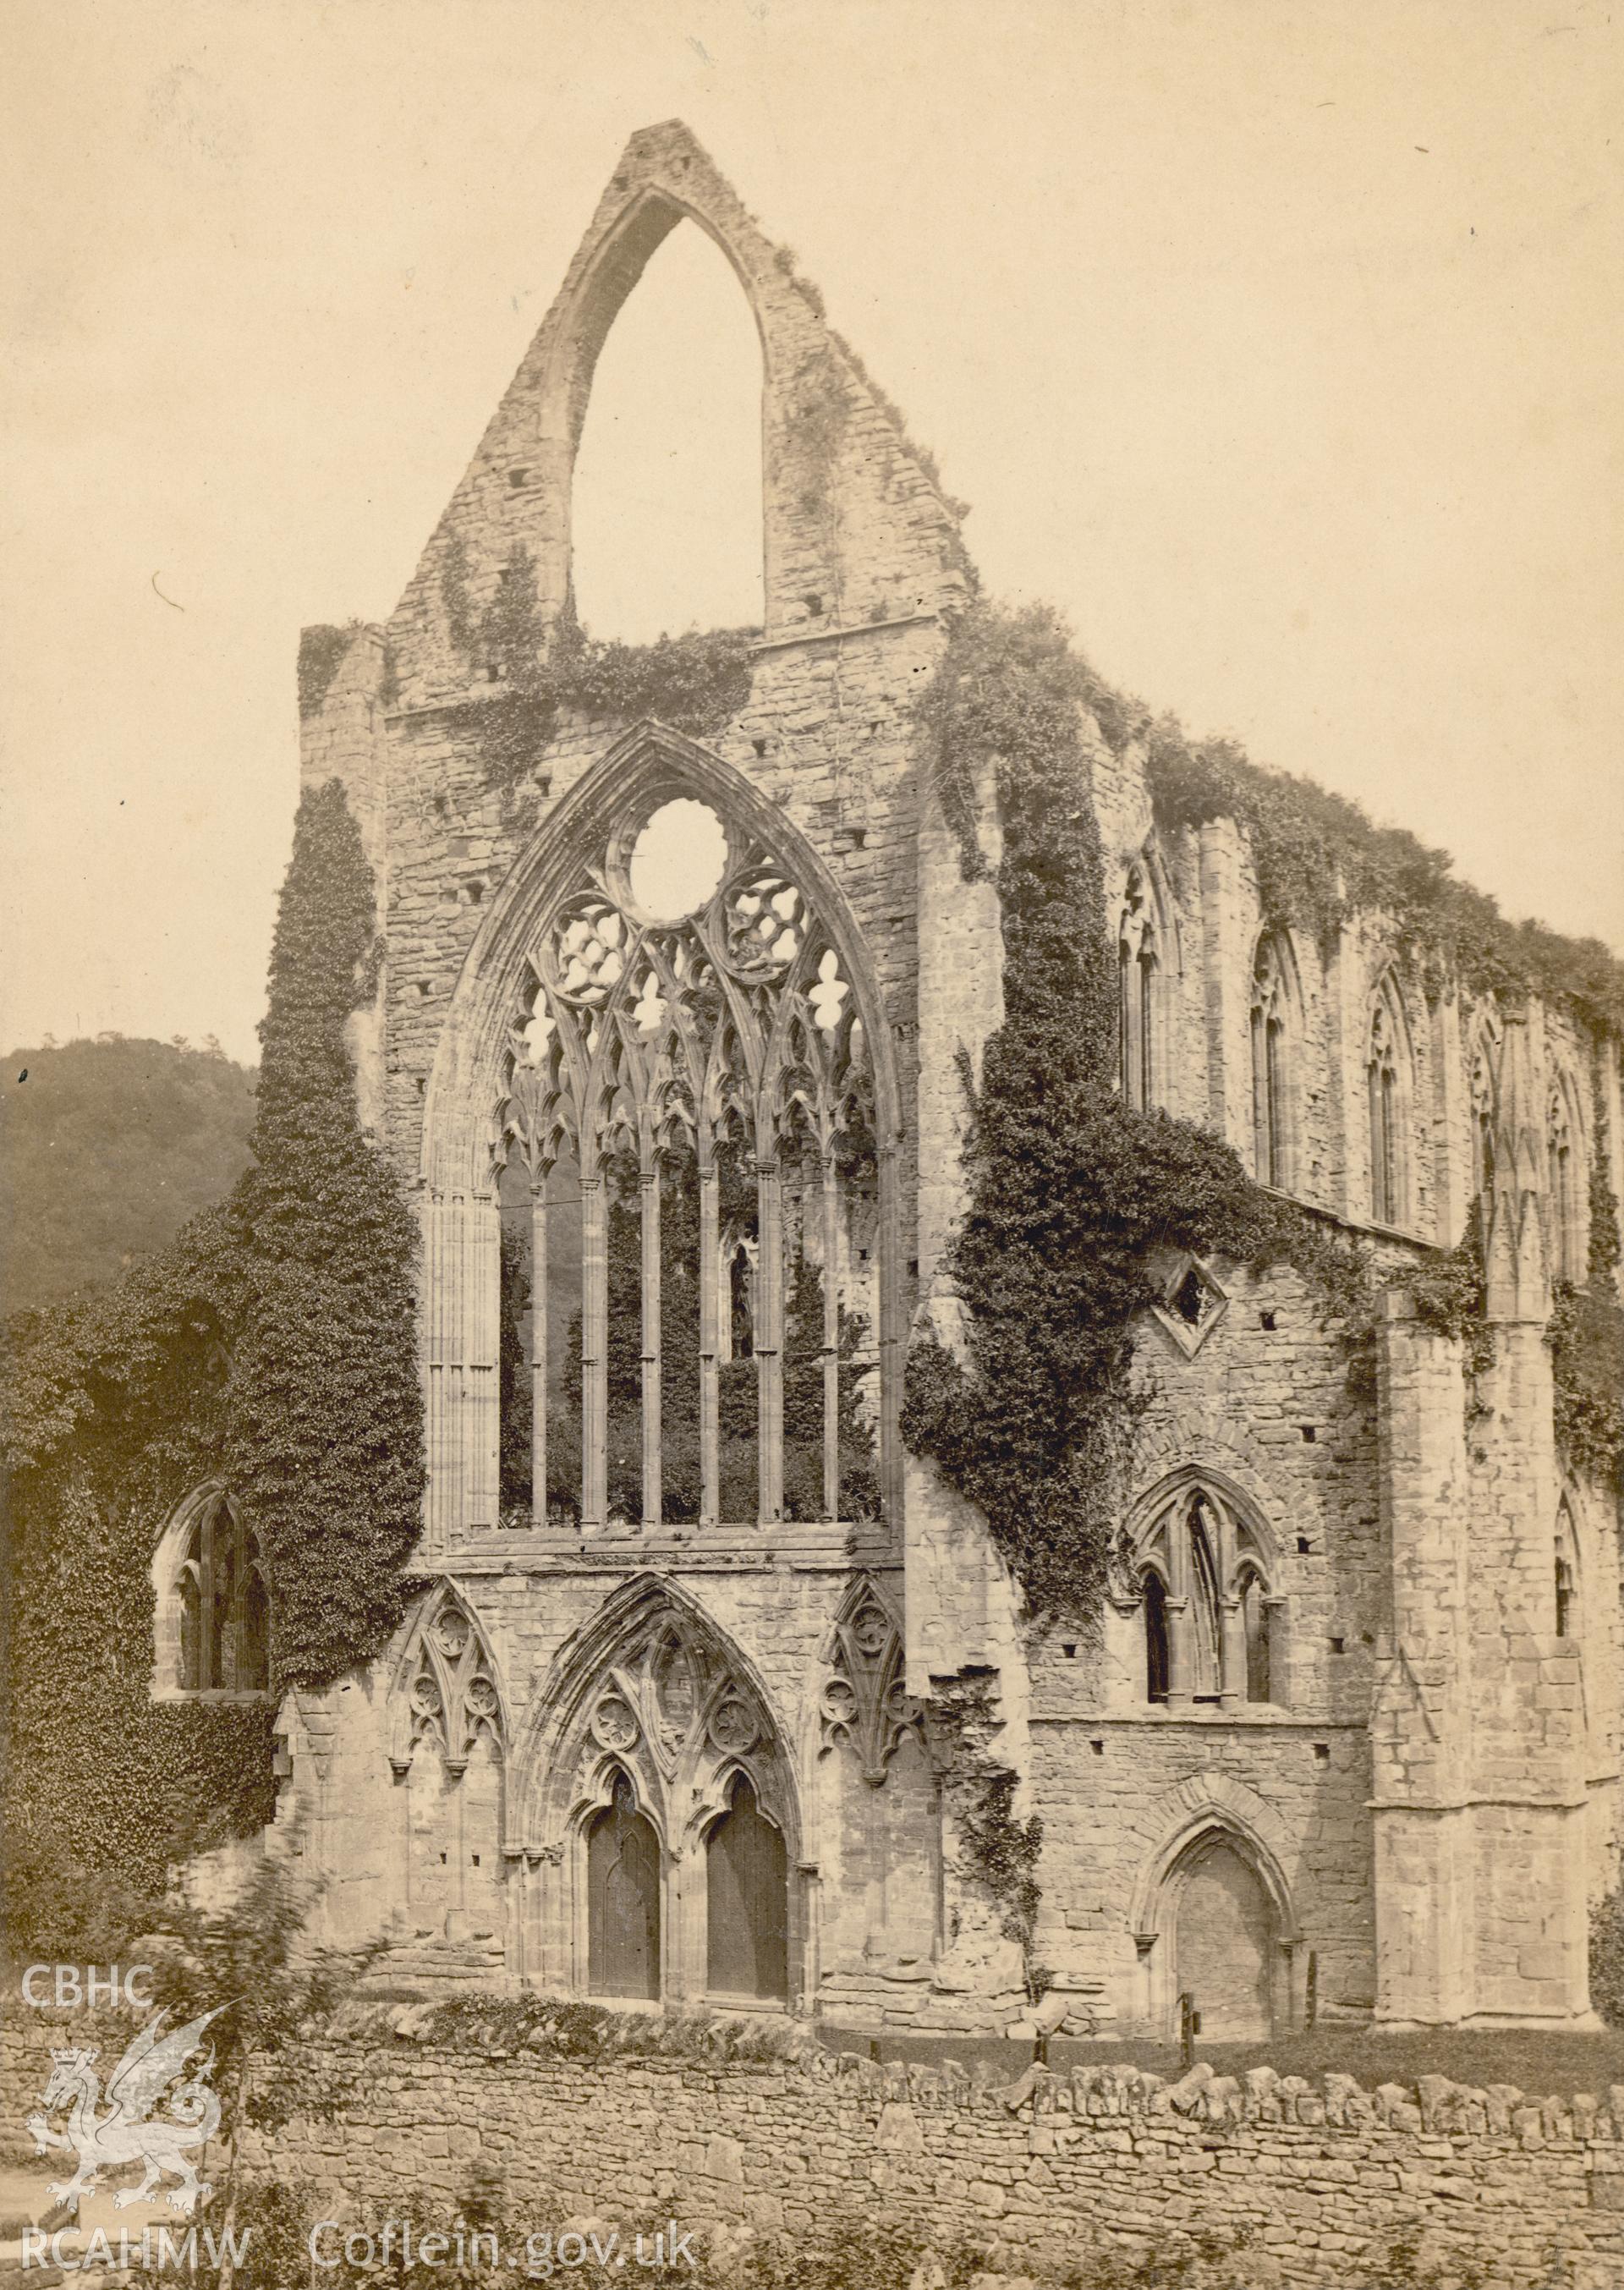 Digital copy of a circa 1870 albumen print showing the west front of Tintern Abbey.